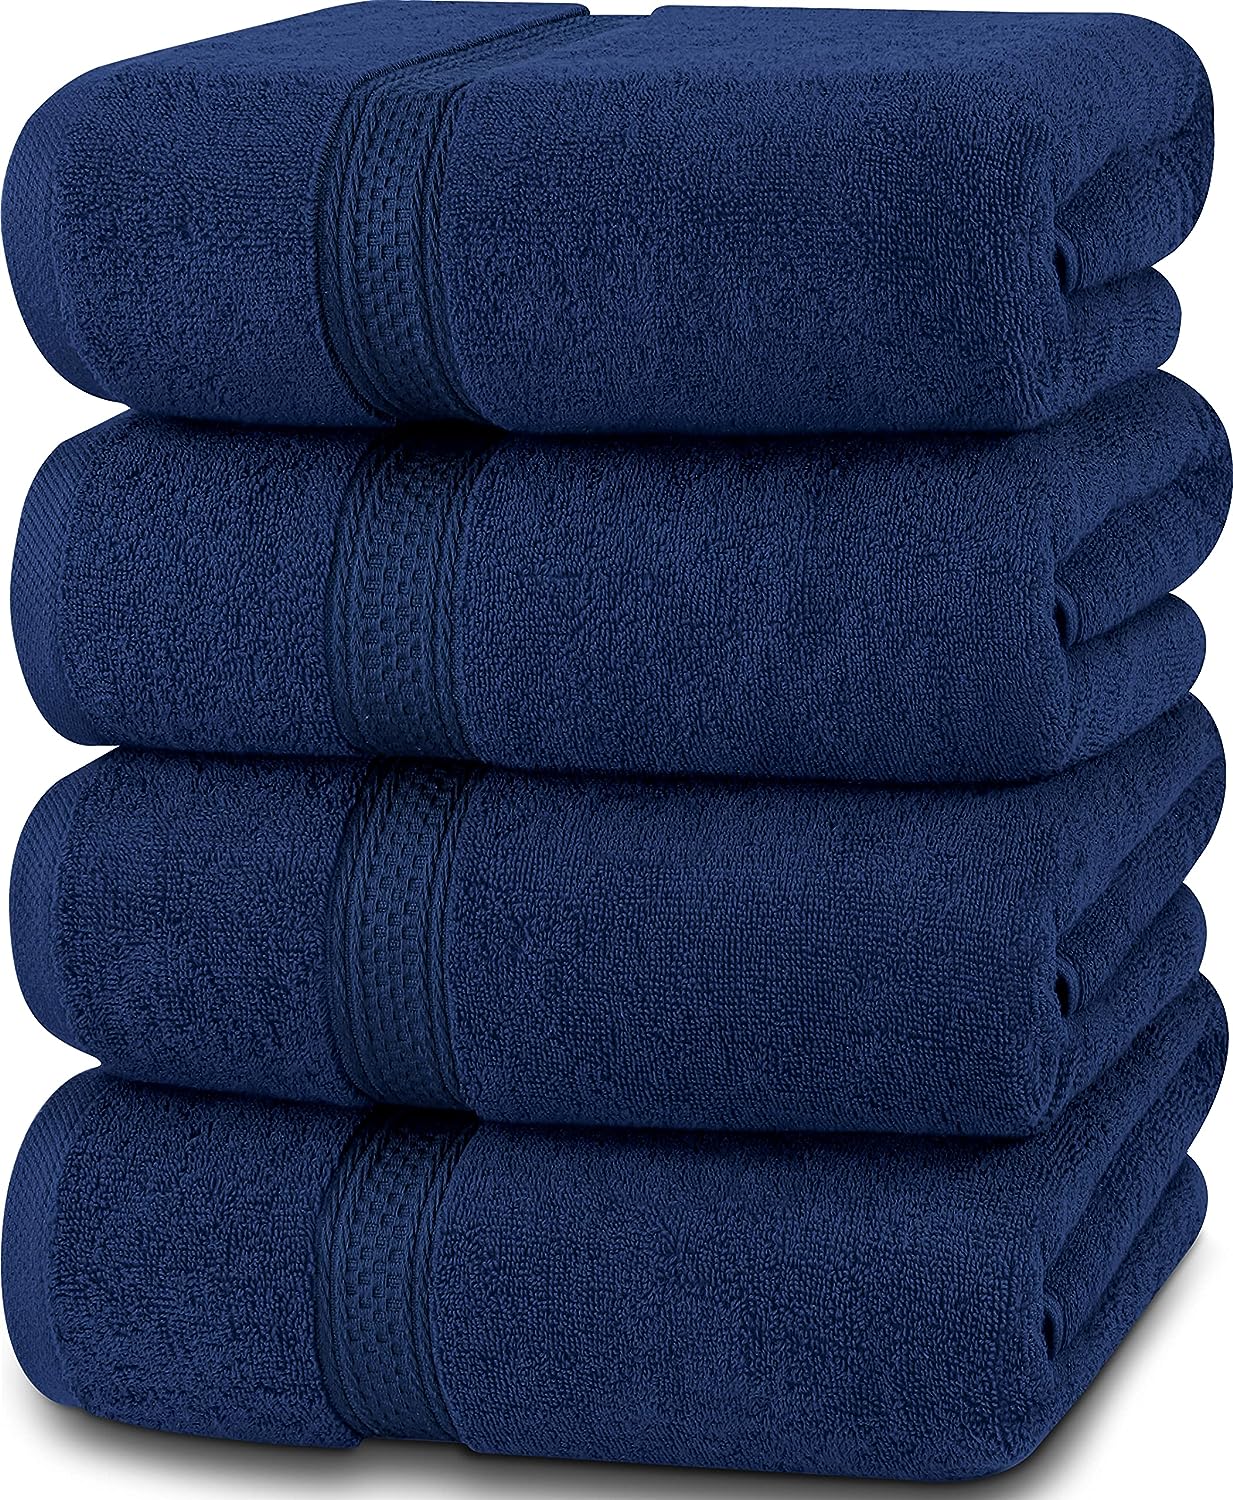 Today Only! Grab the Hottest Deals: Utopia Towels - 4 Piece Bath Towels Set (Navy) - Up to 42% Off!